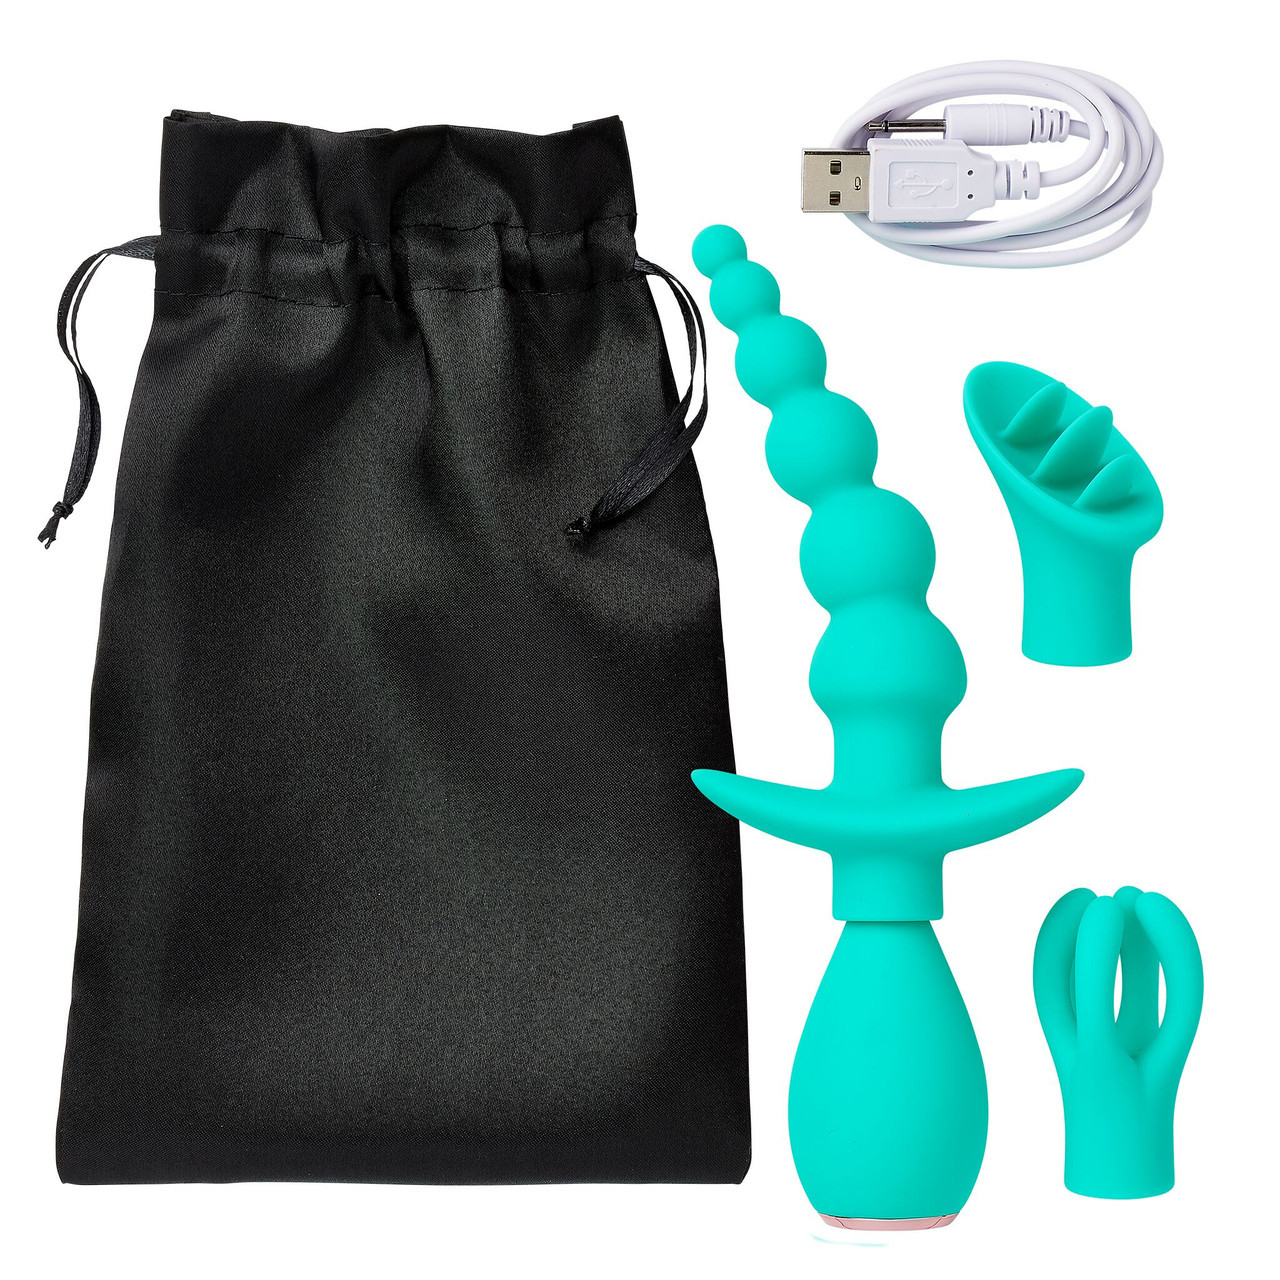 Anal, Clitoral, and Nipple Massager Kit | Buy vibrators for women online from CondomDepot.com